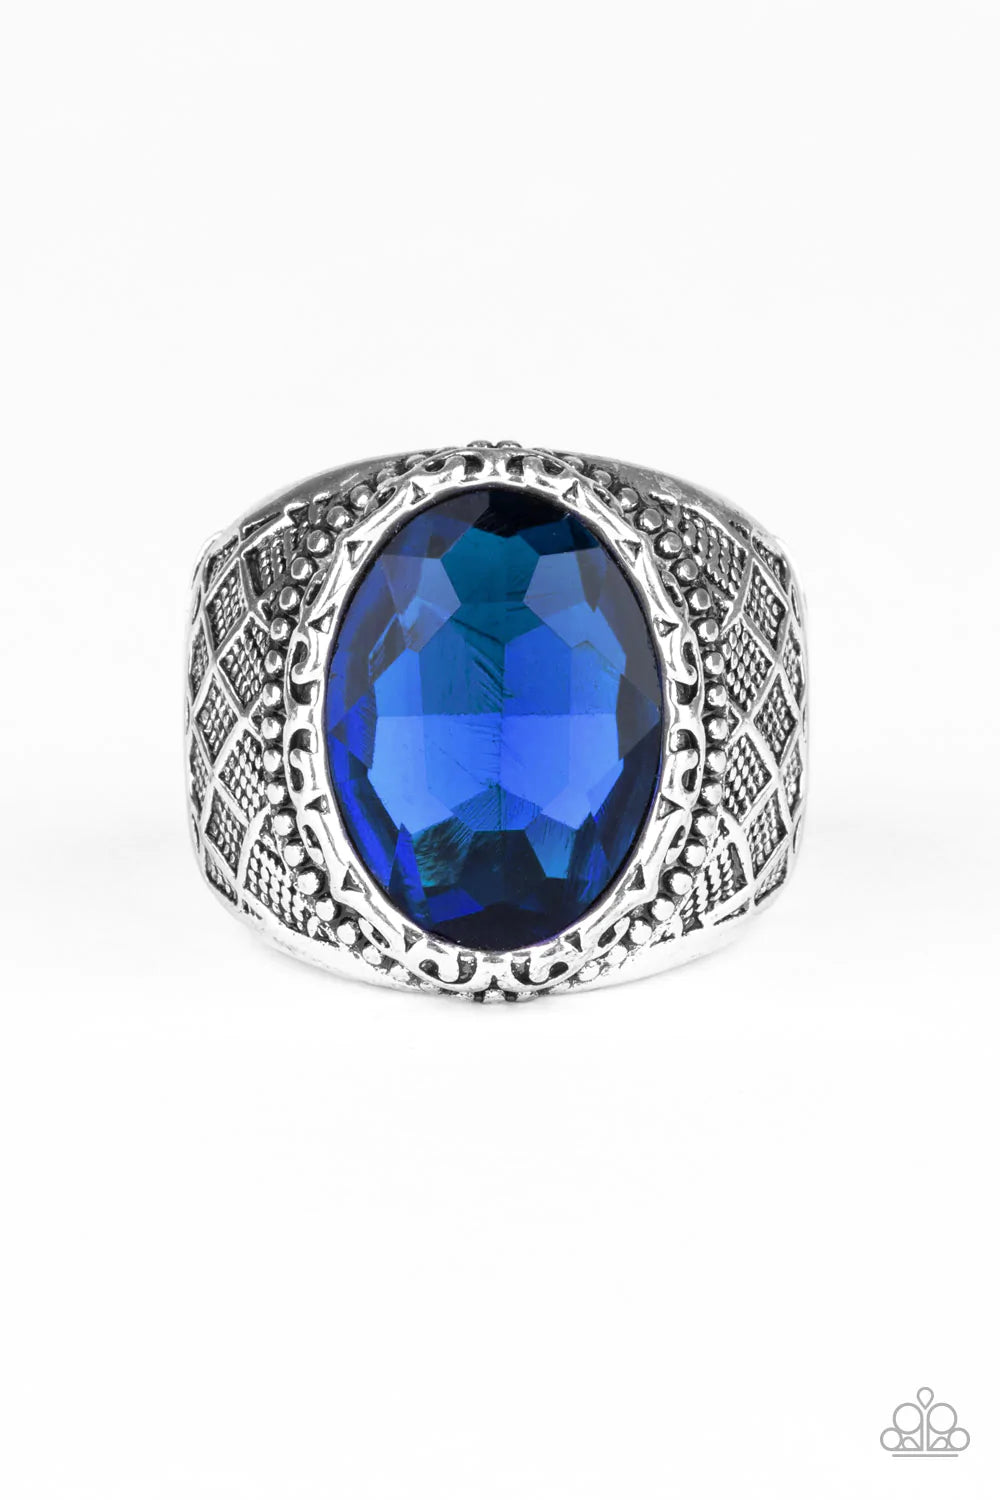 Paparazzi Accessories Pro Bowl - Blue An oval blue rhinestone is pressed into the center of a thick silver band embossed in a crisscrossed texture for a regal look. Features a stretchy band for a flexible fit. Sold as one individual ring.